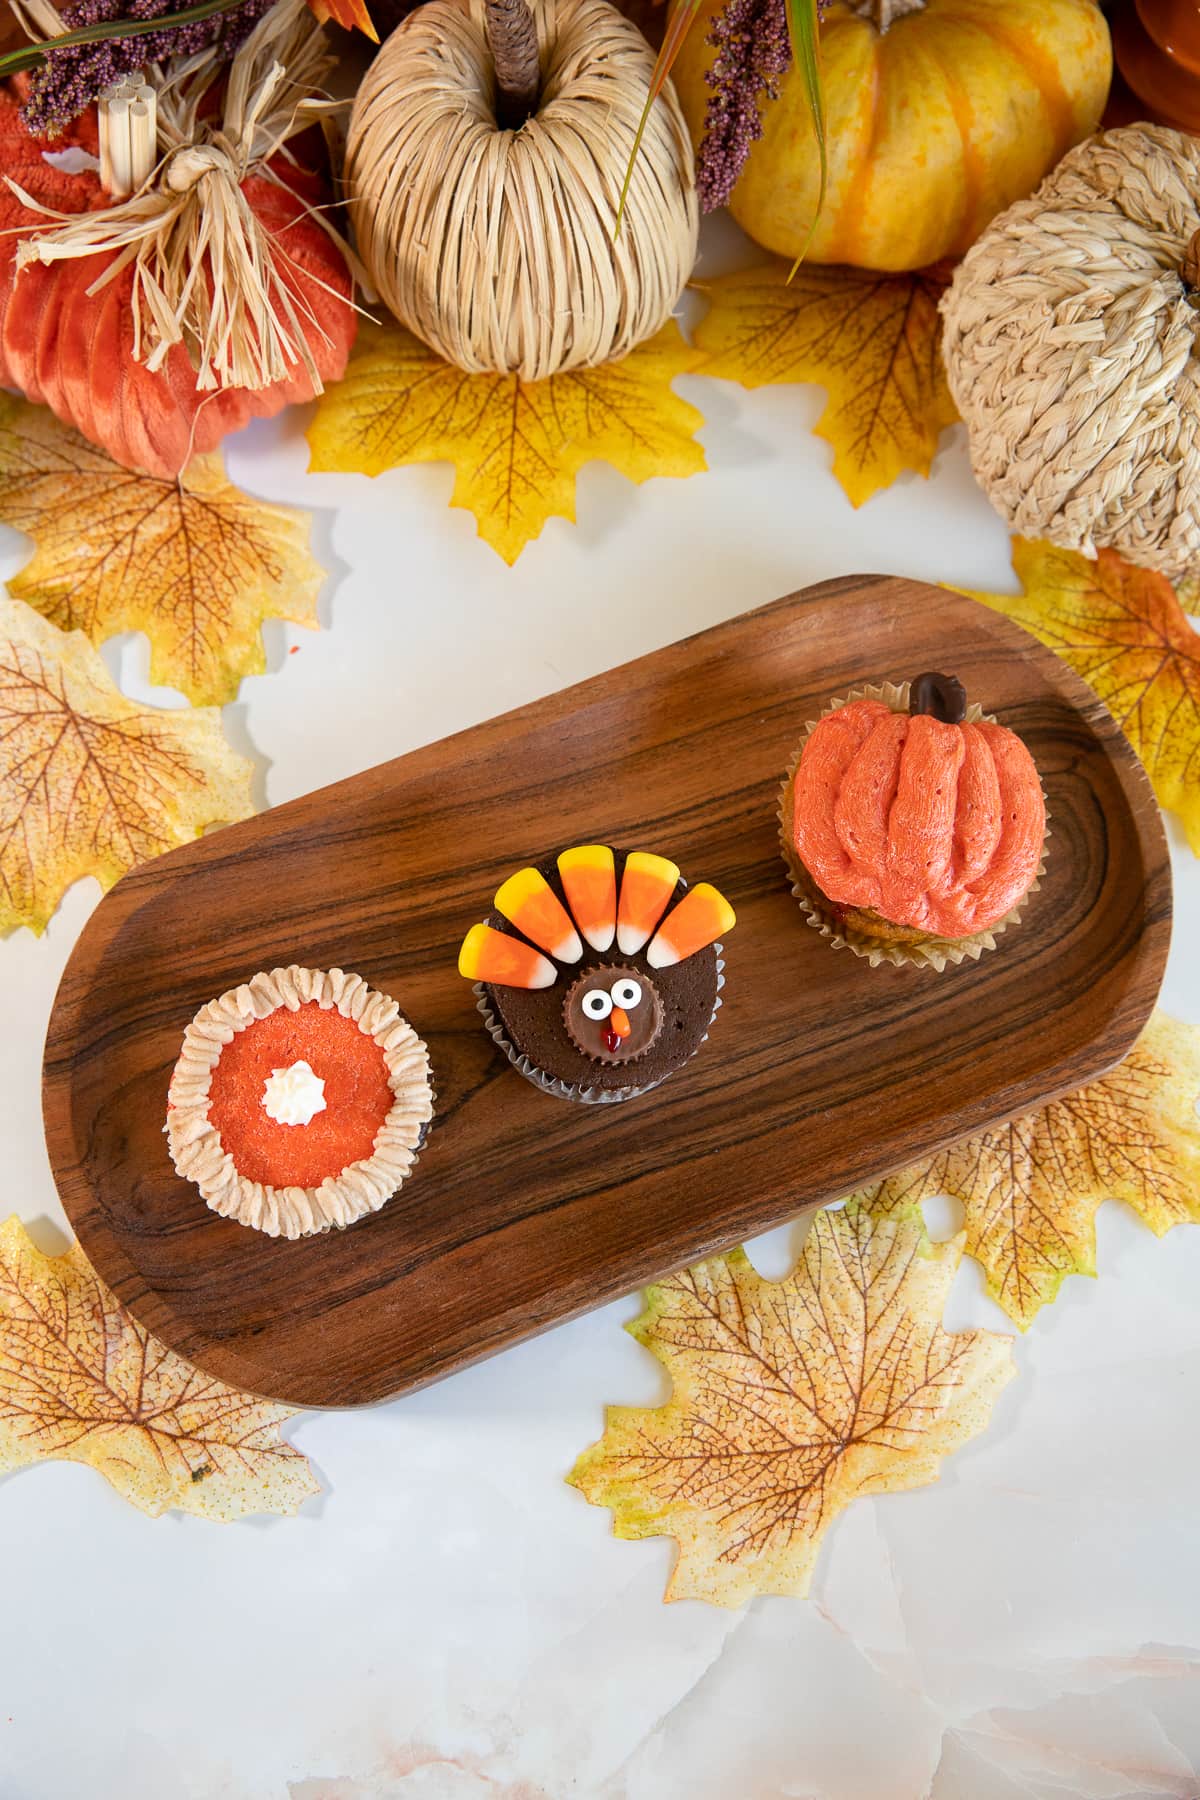 turkey, pie, and pumpkin decorated cupcakes on wooden tray.